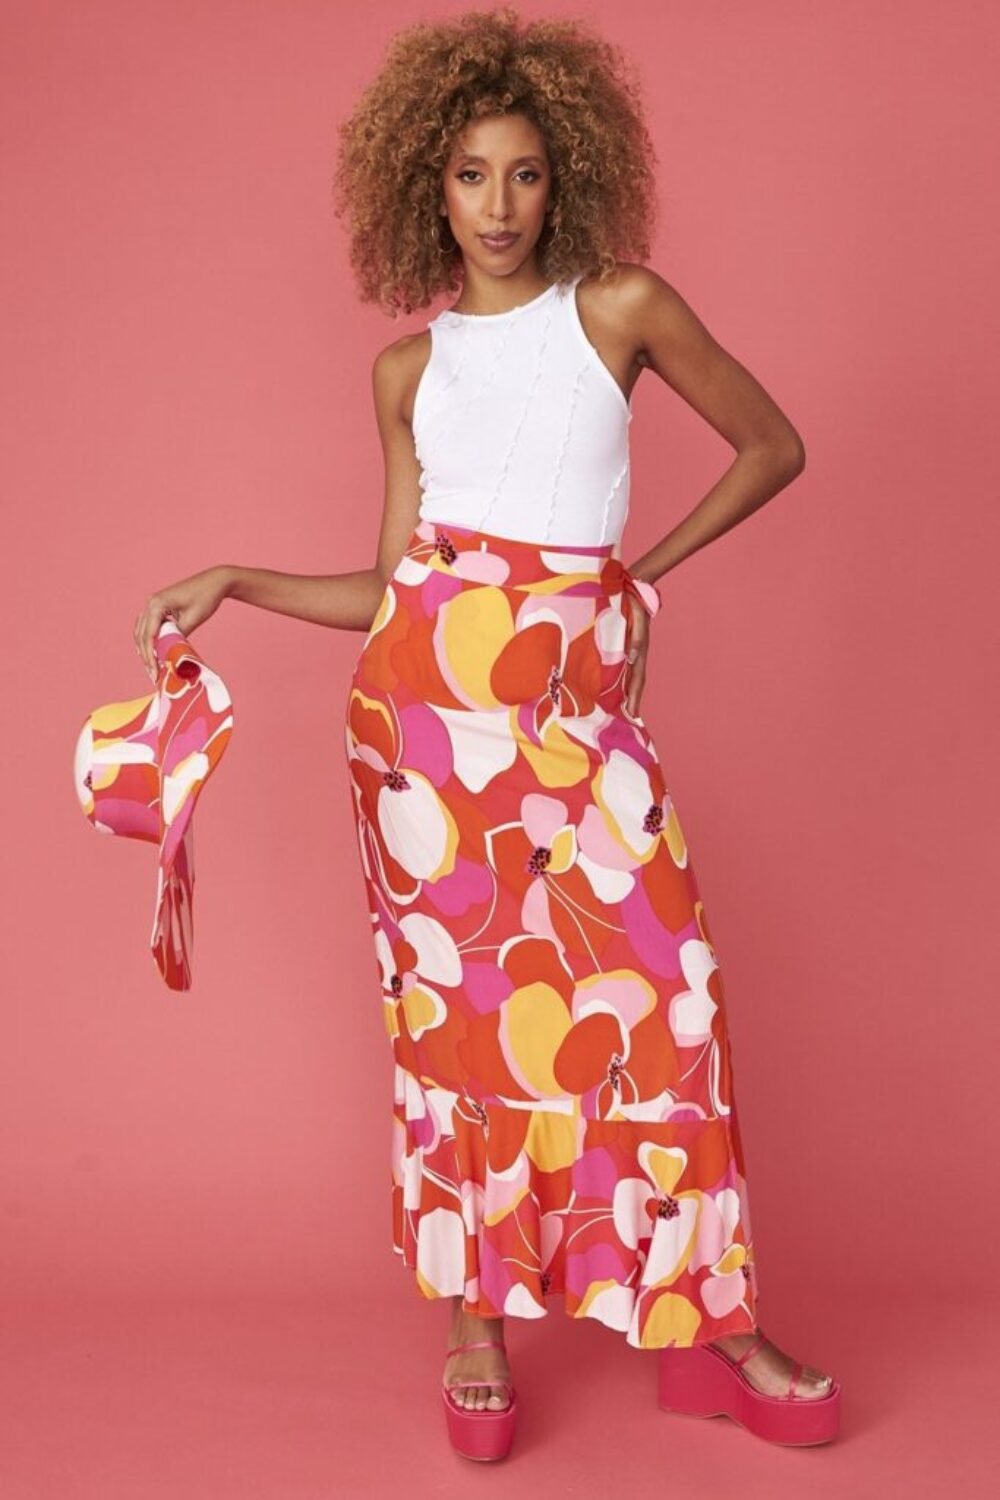 Shop Lux Florence Floral Maxi Wrap Skirt and women's luxury and designer clothes at www.lux-apparel.co.uk